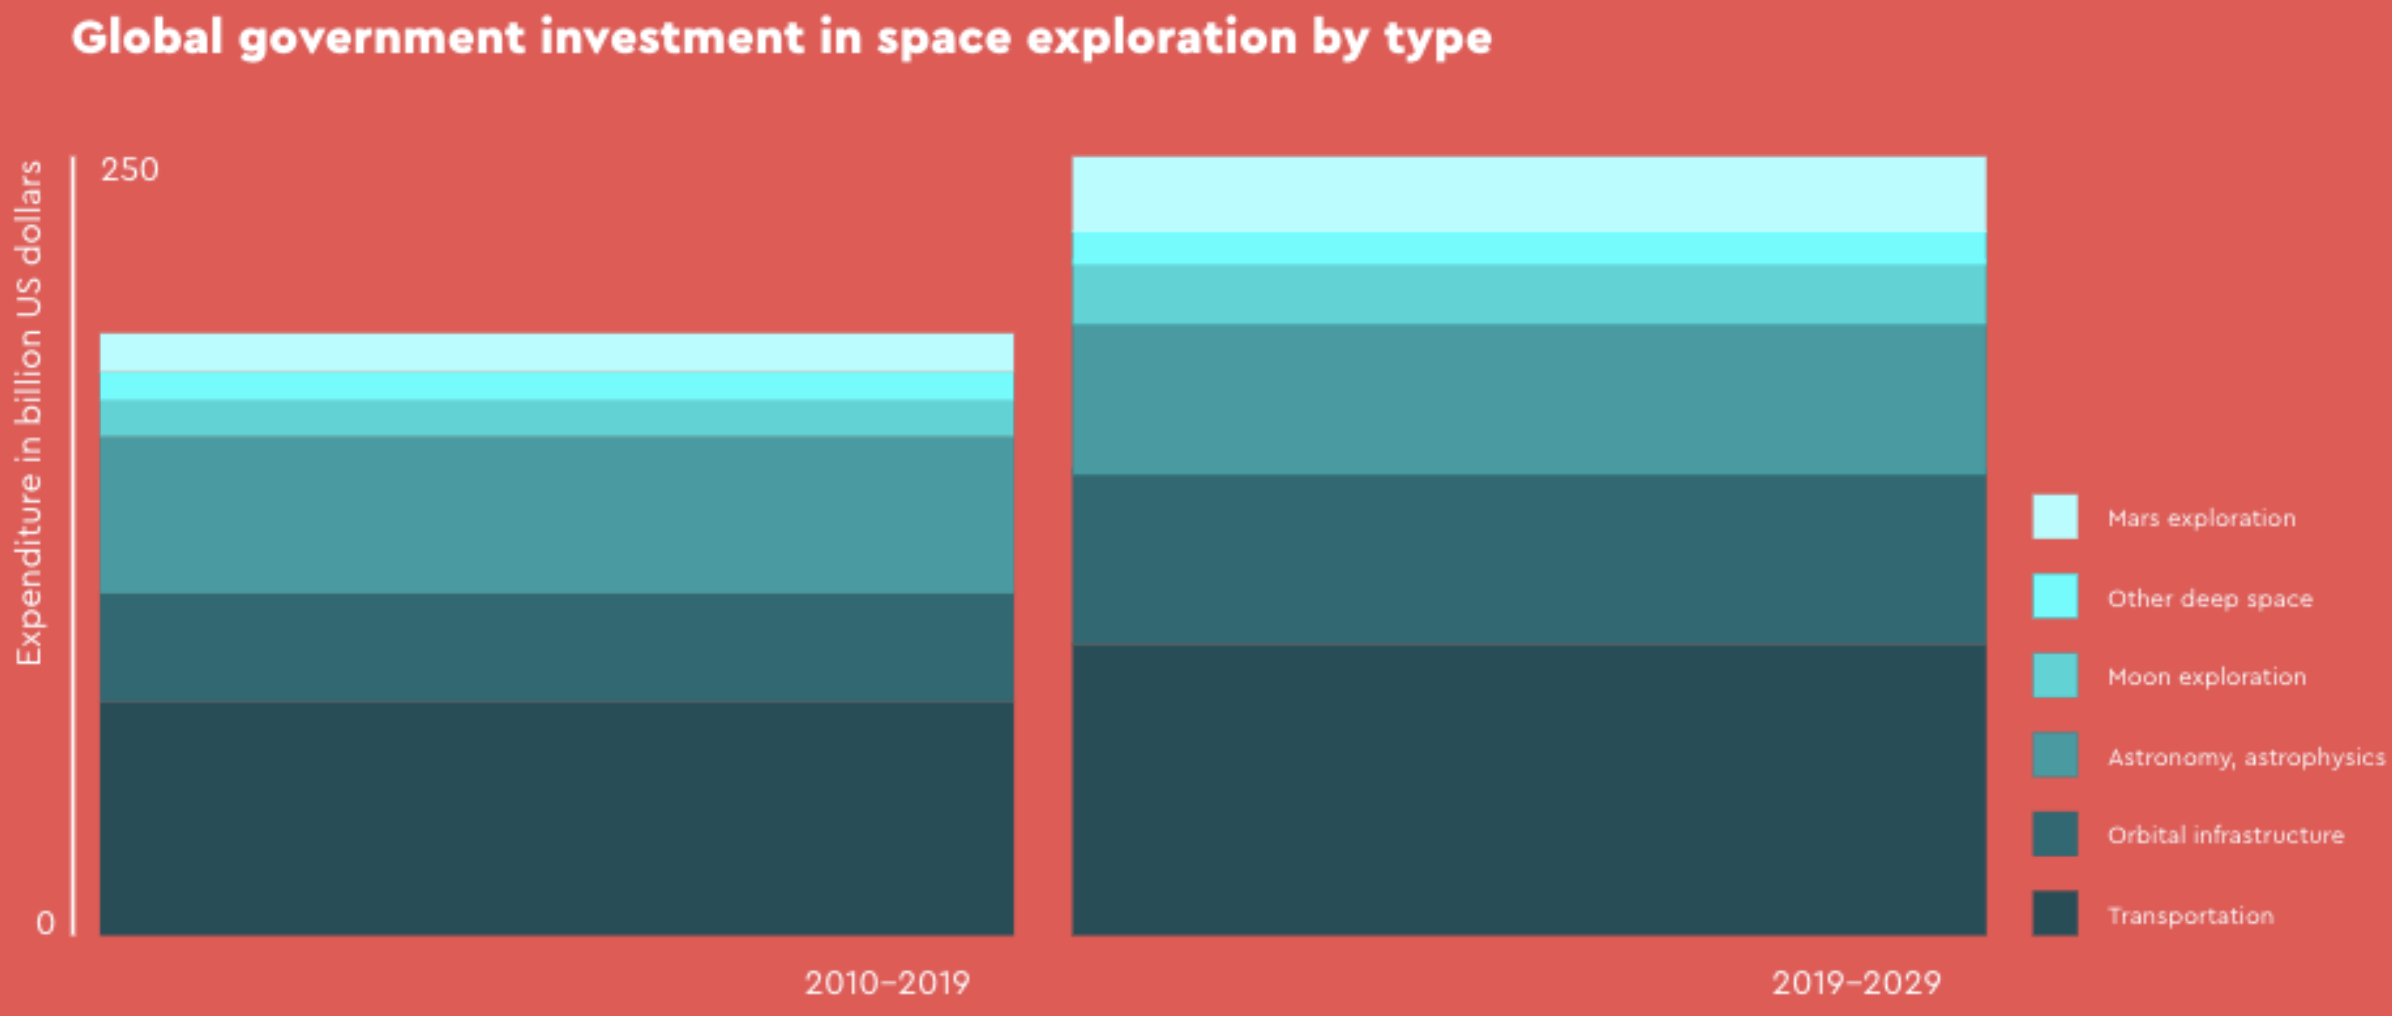 Global government investment in space exploration by type chart